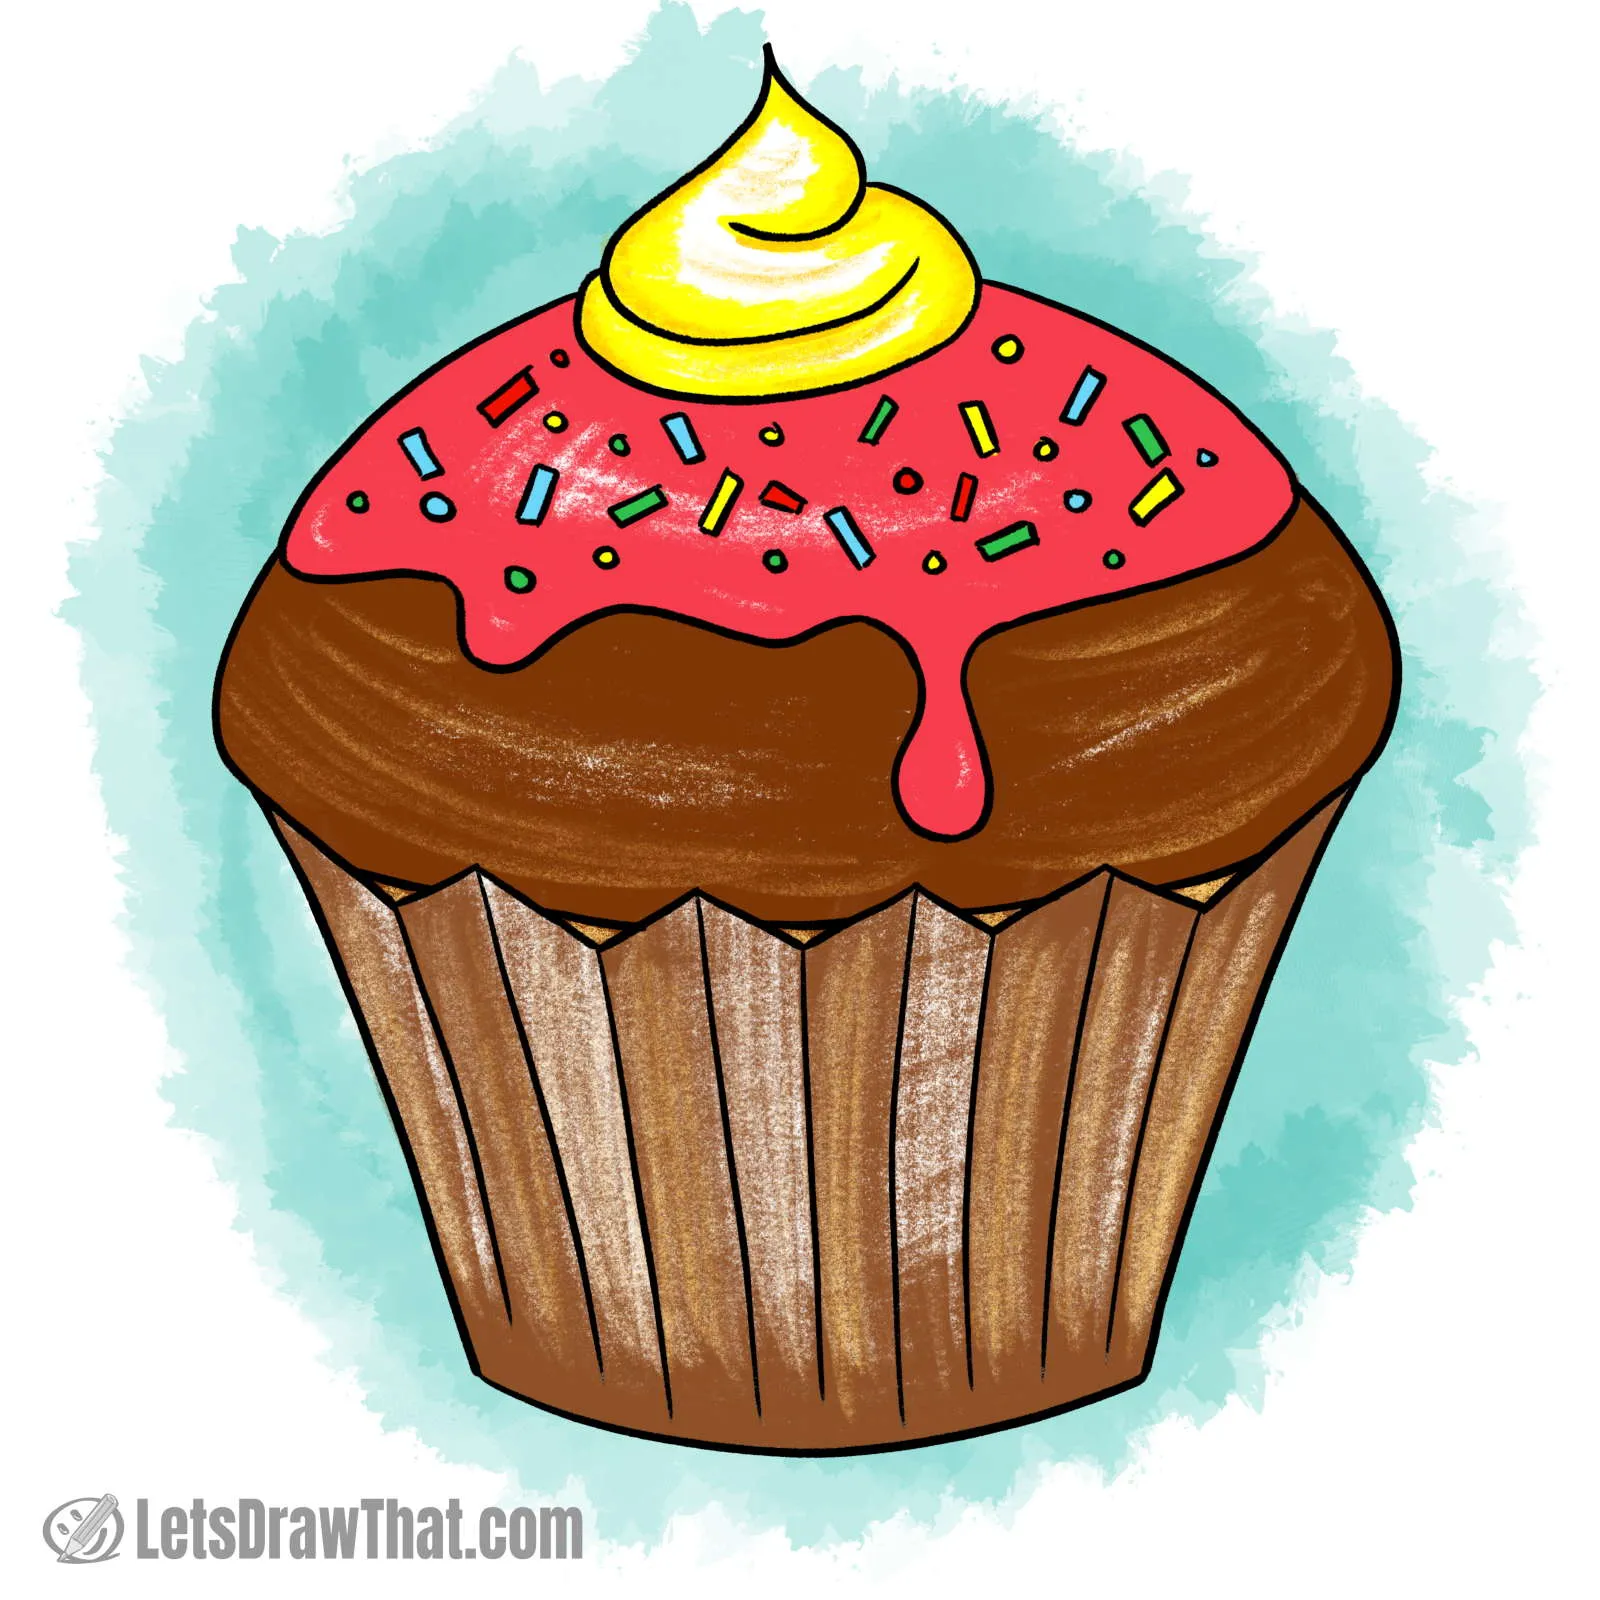 How to draw a cupcake: finished drawing coloured-in